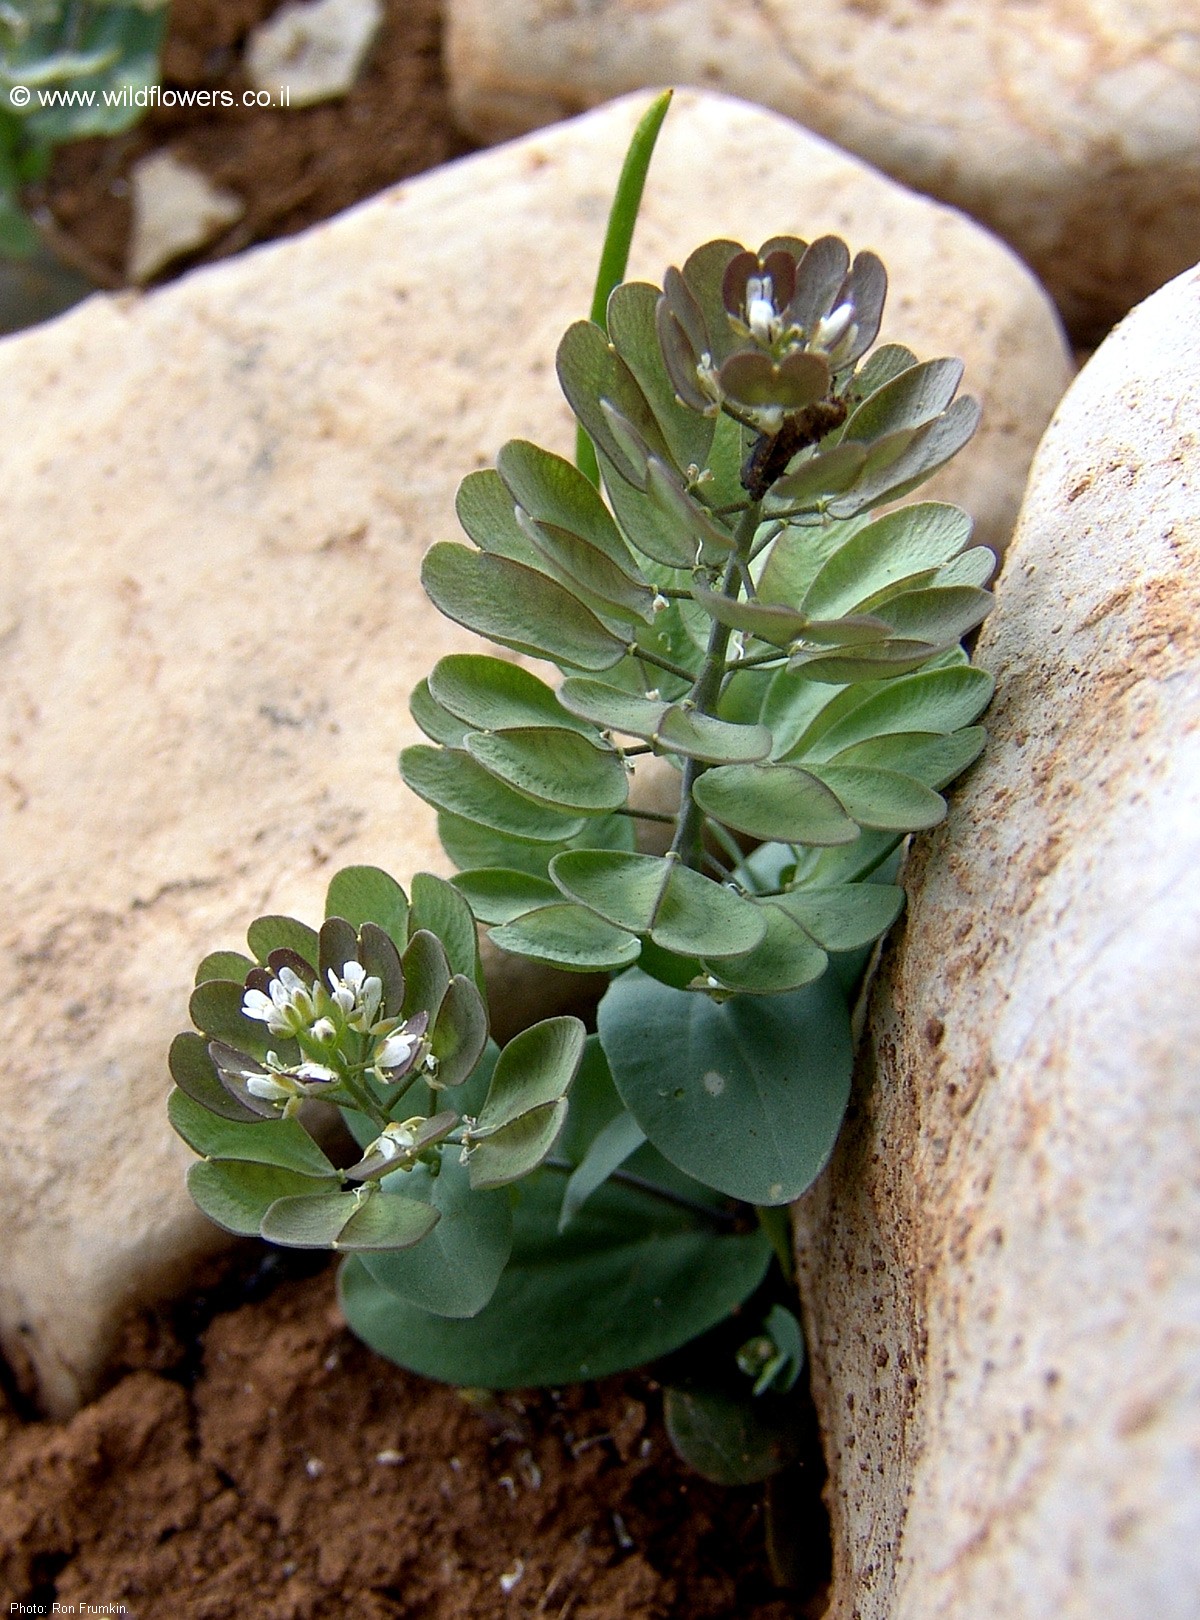 Thlaspi brevicule